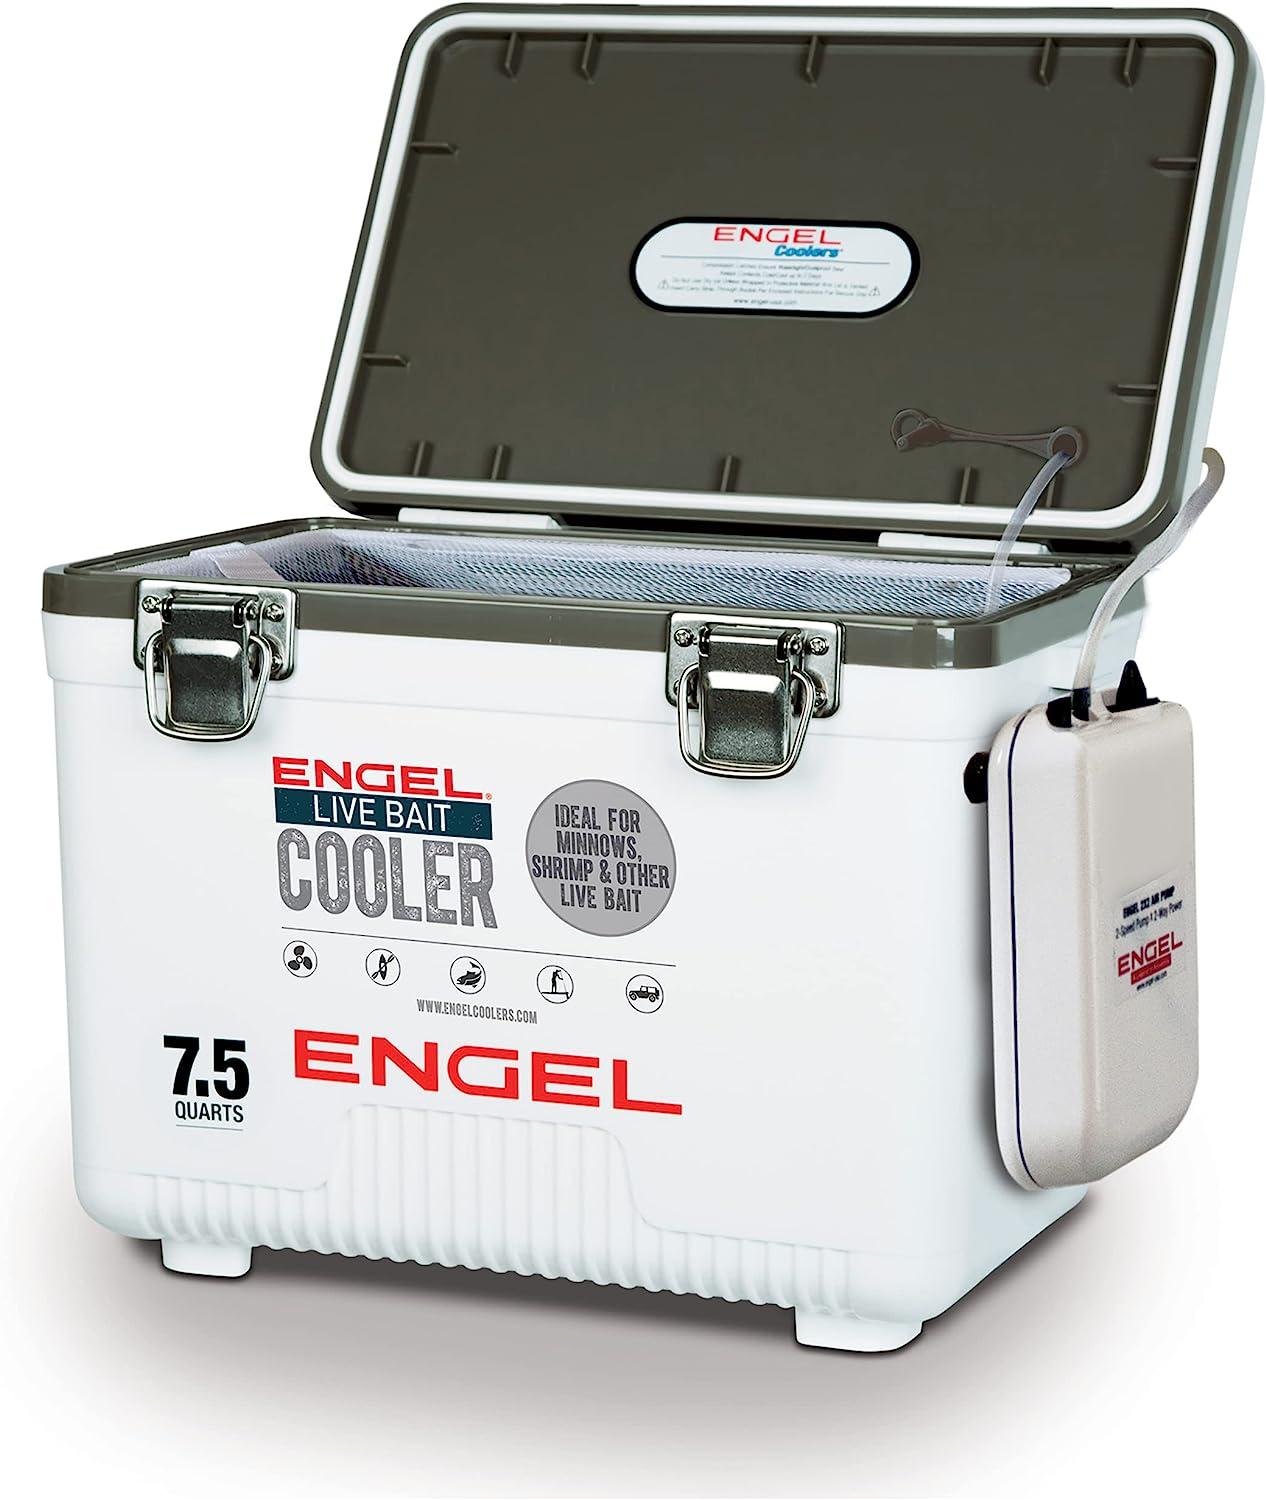 Engel 7.5qt Live Bait Cooler Box with 2nd Gen 2-Speed Portable Aerator  Pump. Fishing Bait Station and Minnow Bucket for Shrimp, Minnows, and Other Live  Bait - ENGLBC7-N White